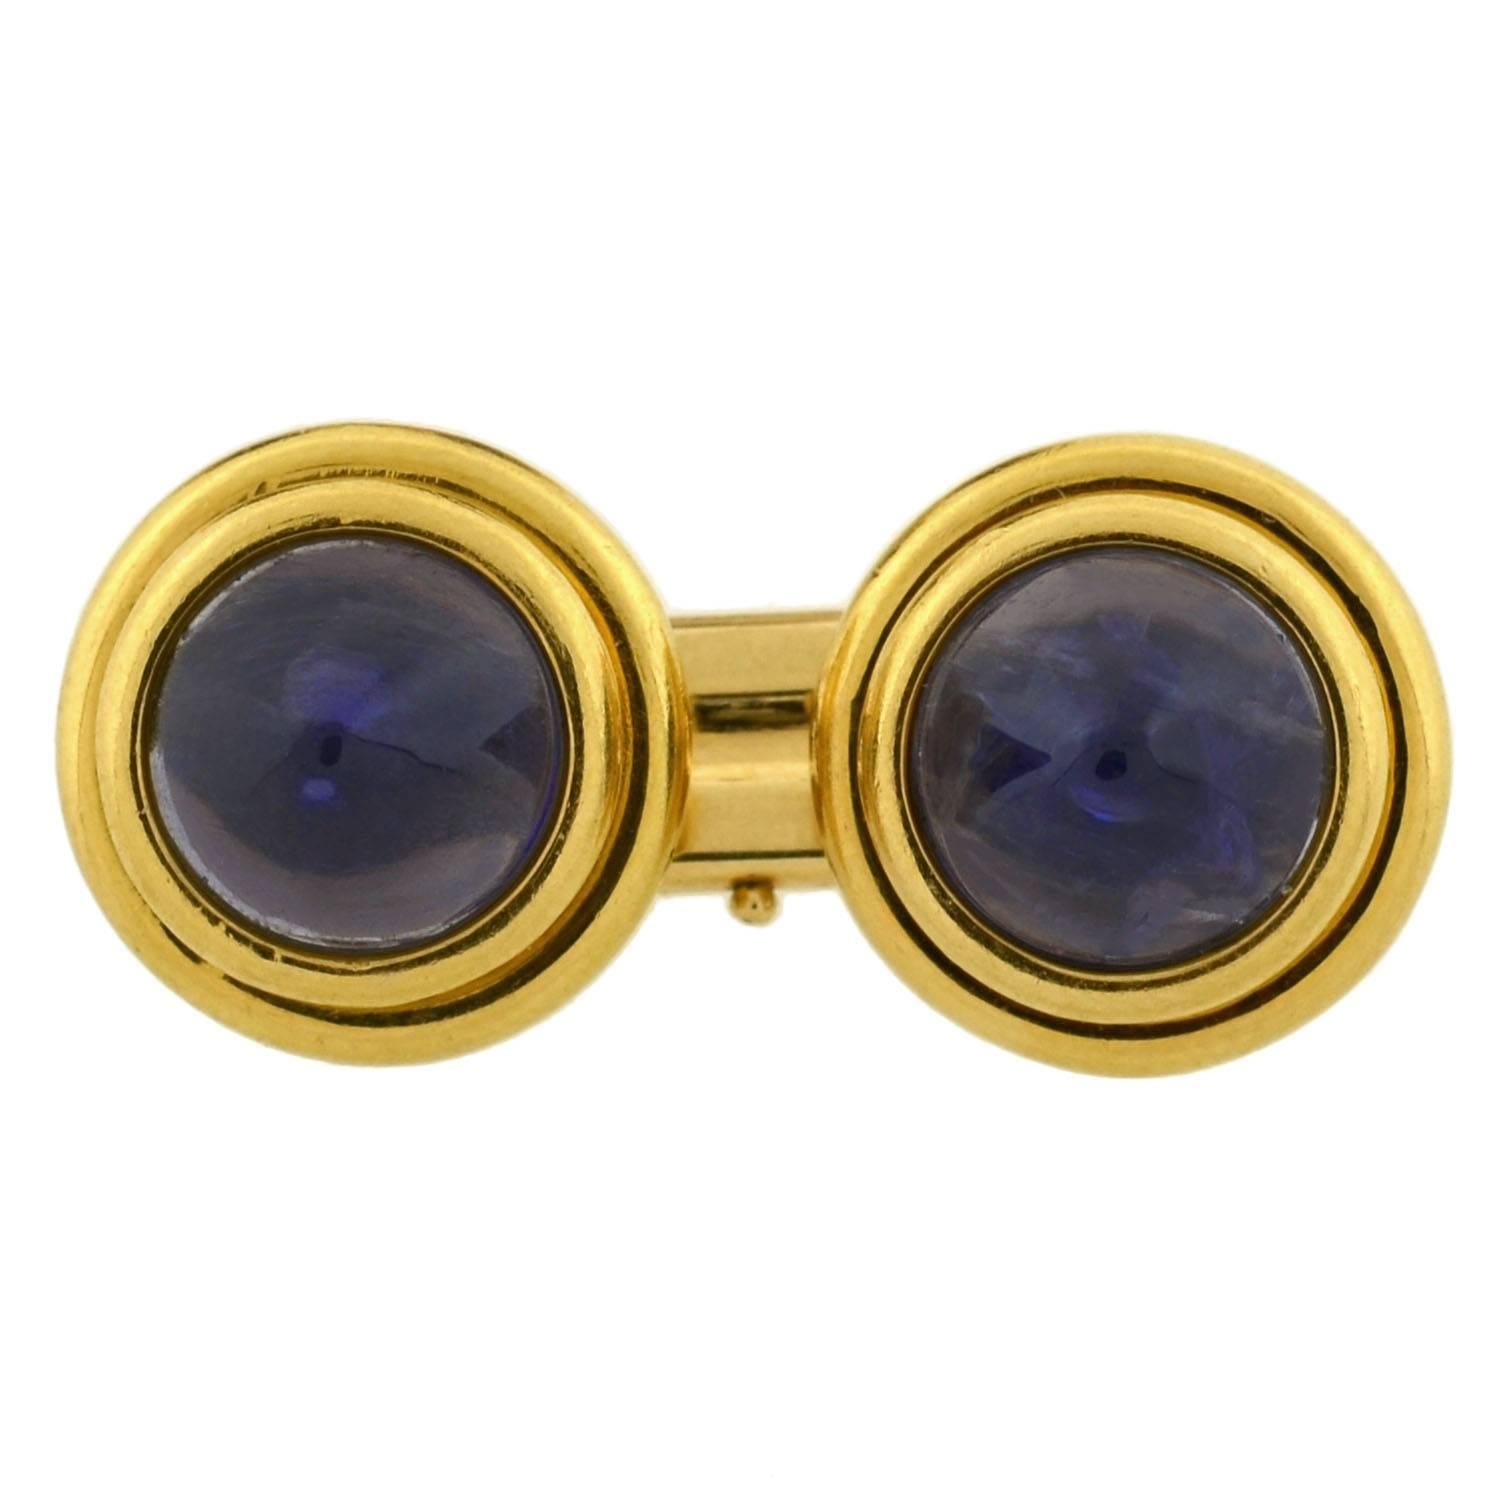 A fabulous pair of signed Bvlgari cufflinks from the Retro (ca1940) era! Crafted in 18kt yellow gold, each of these double-sided cufflinks has a round face and a vibrant iolite stone set in the center. The violet clored cabochon stones are smoothly